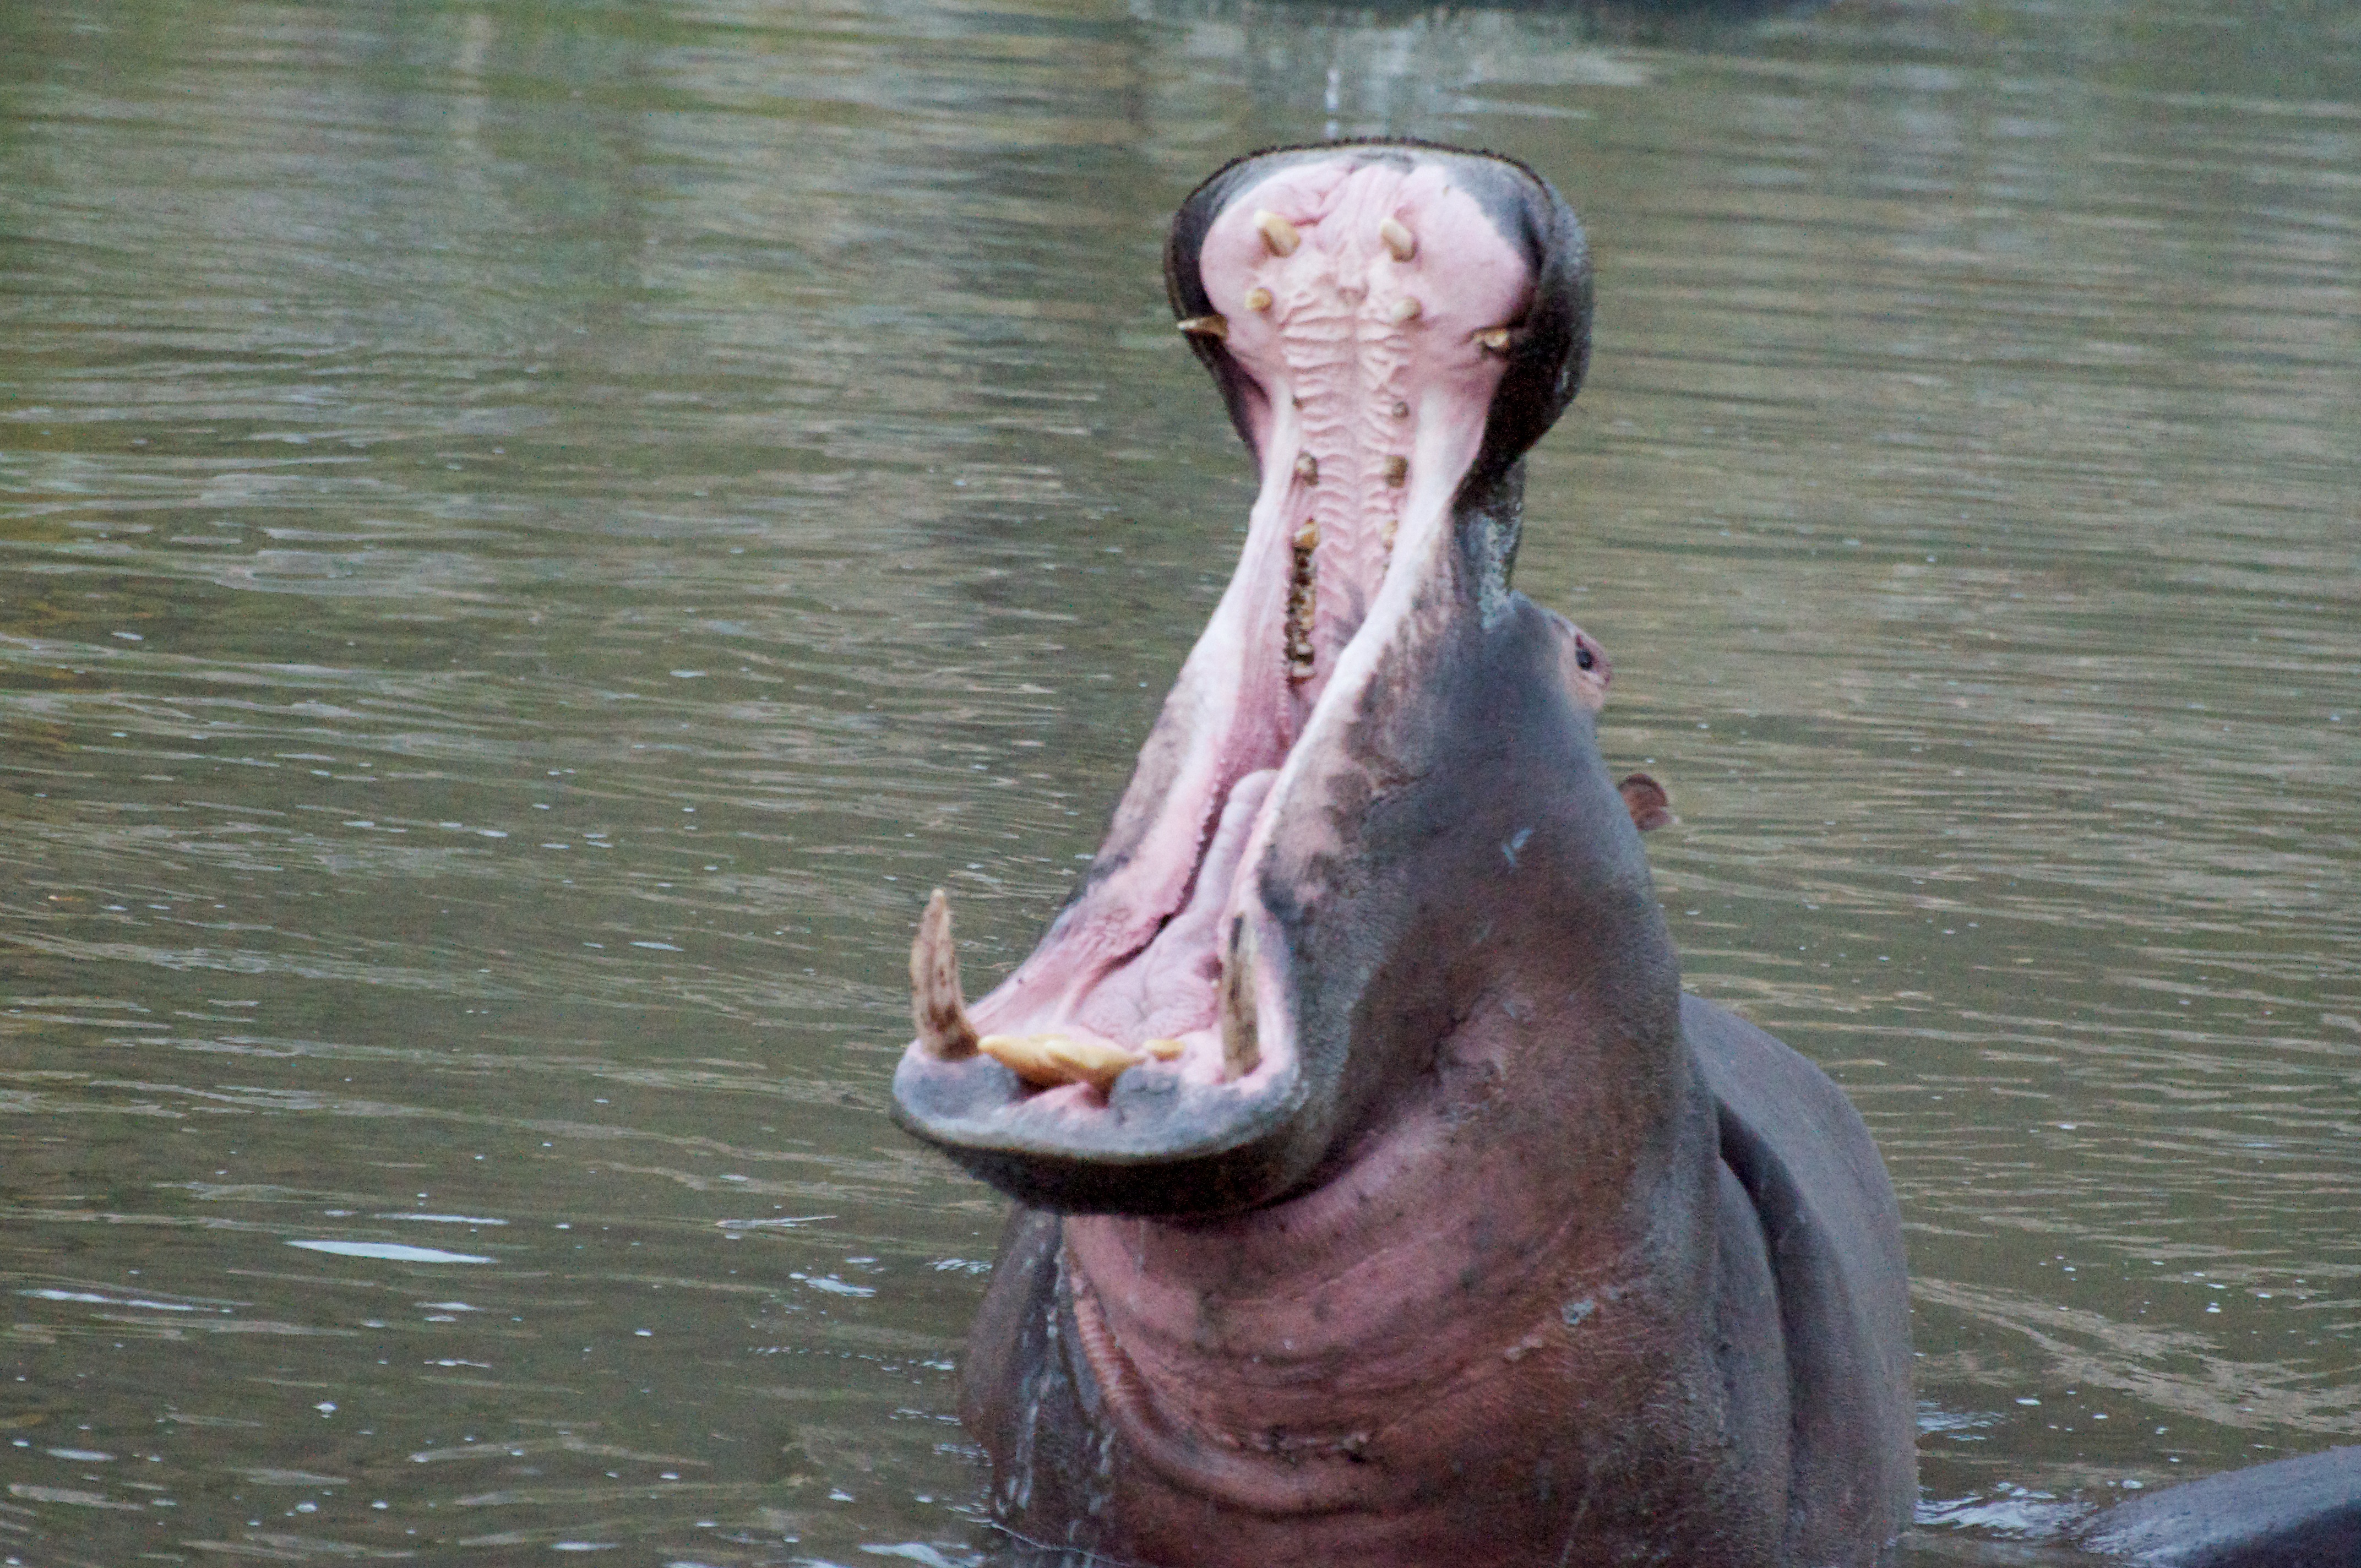 File:Hippo mouth opening.jpg - Wikimedia Commons